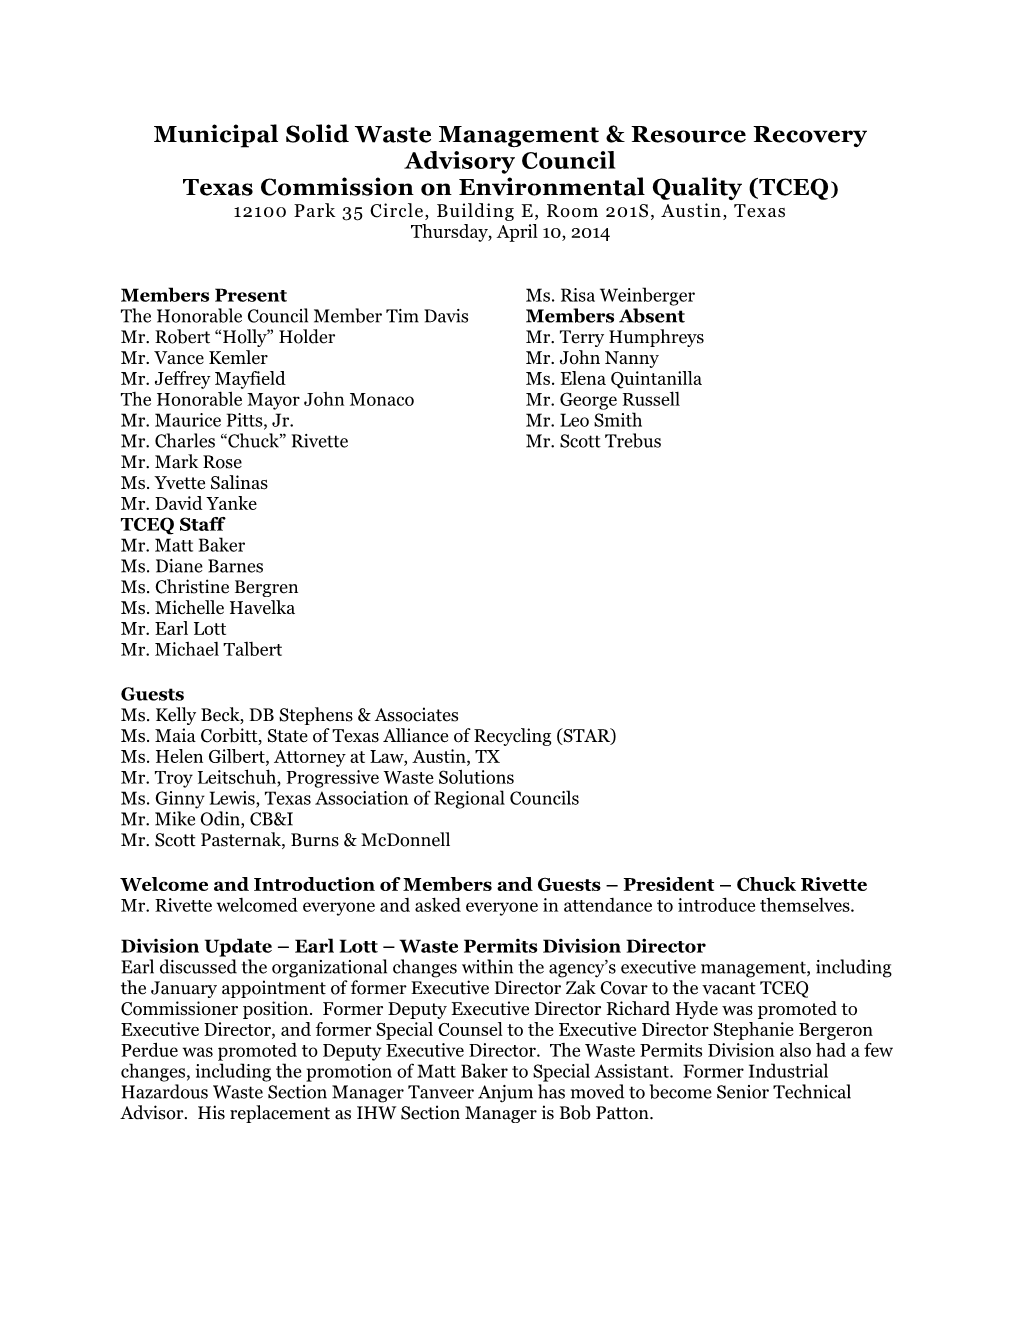 Municipal Solid Waste Management & Resource Recovery Advisory Council Texas Commission